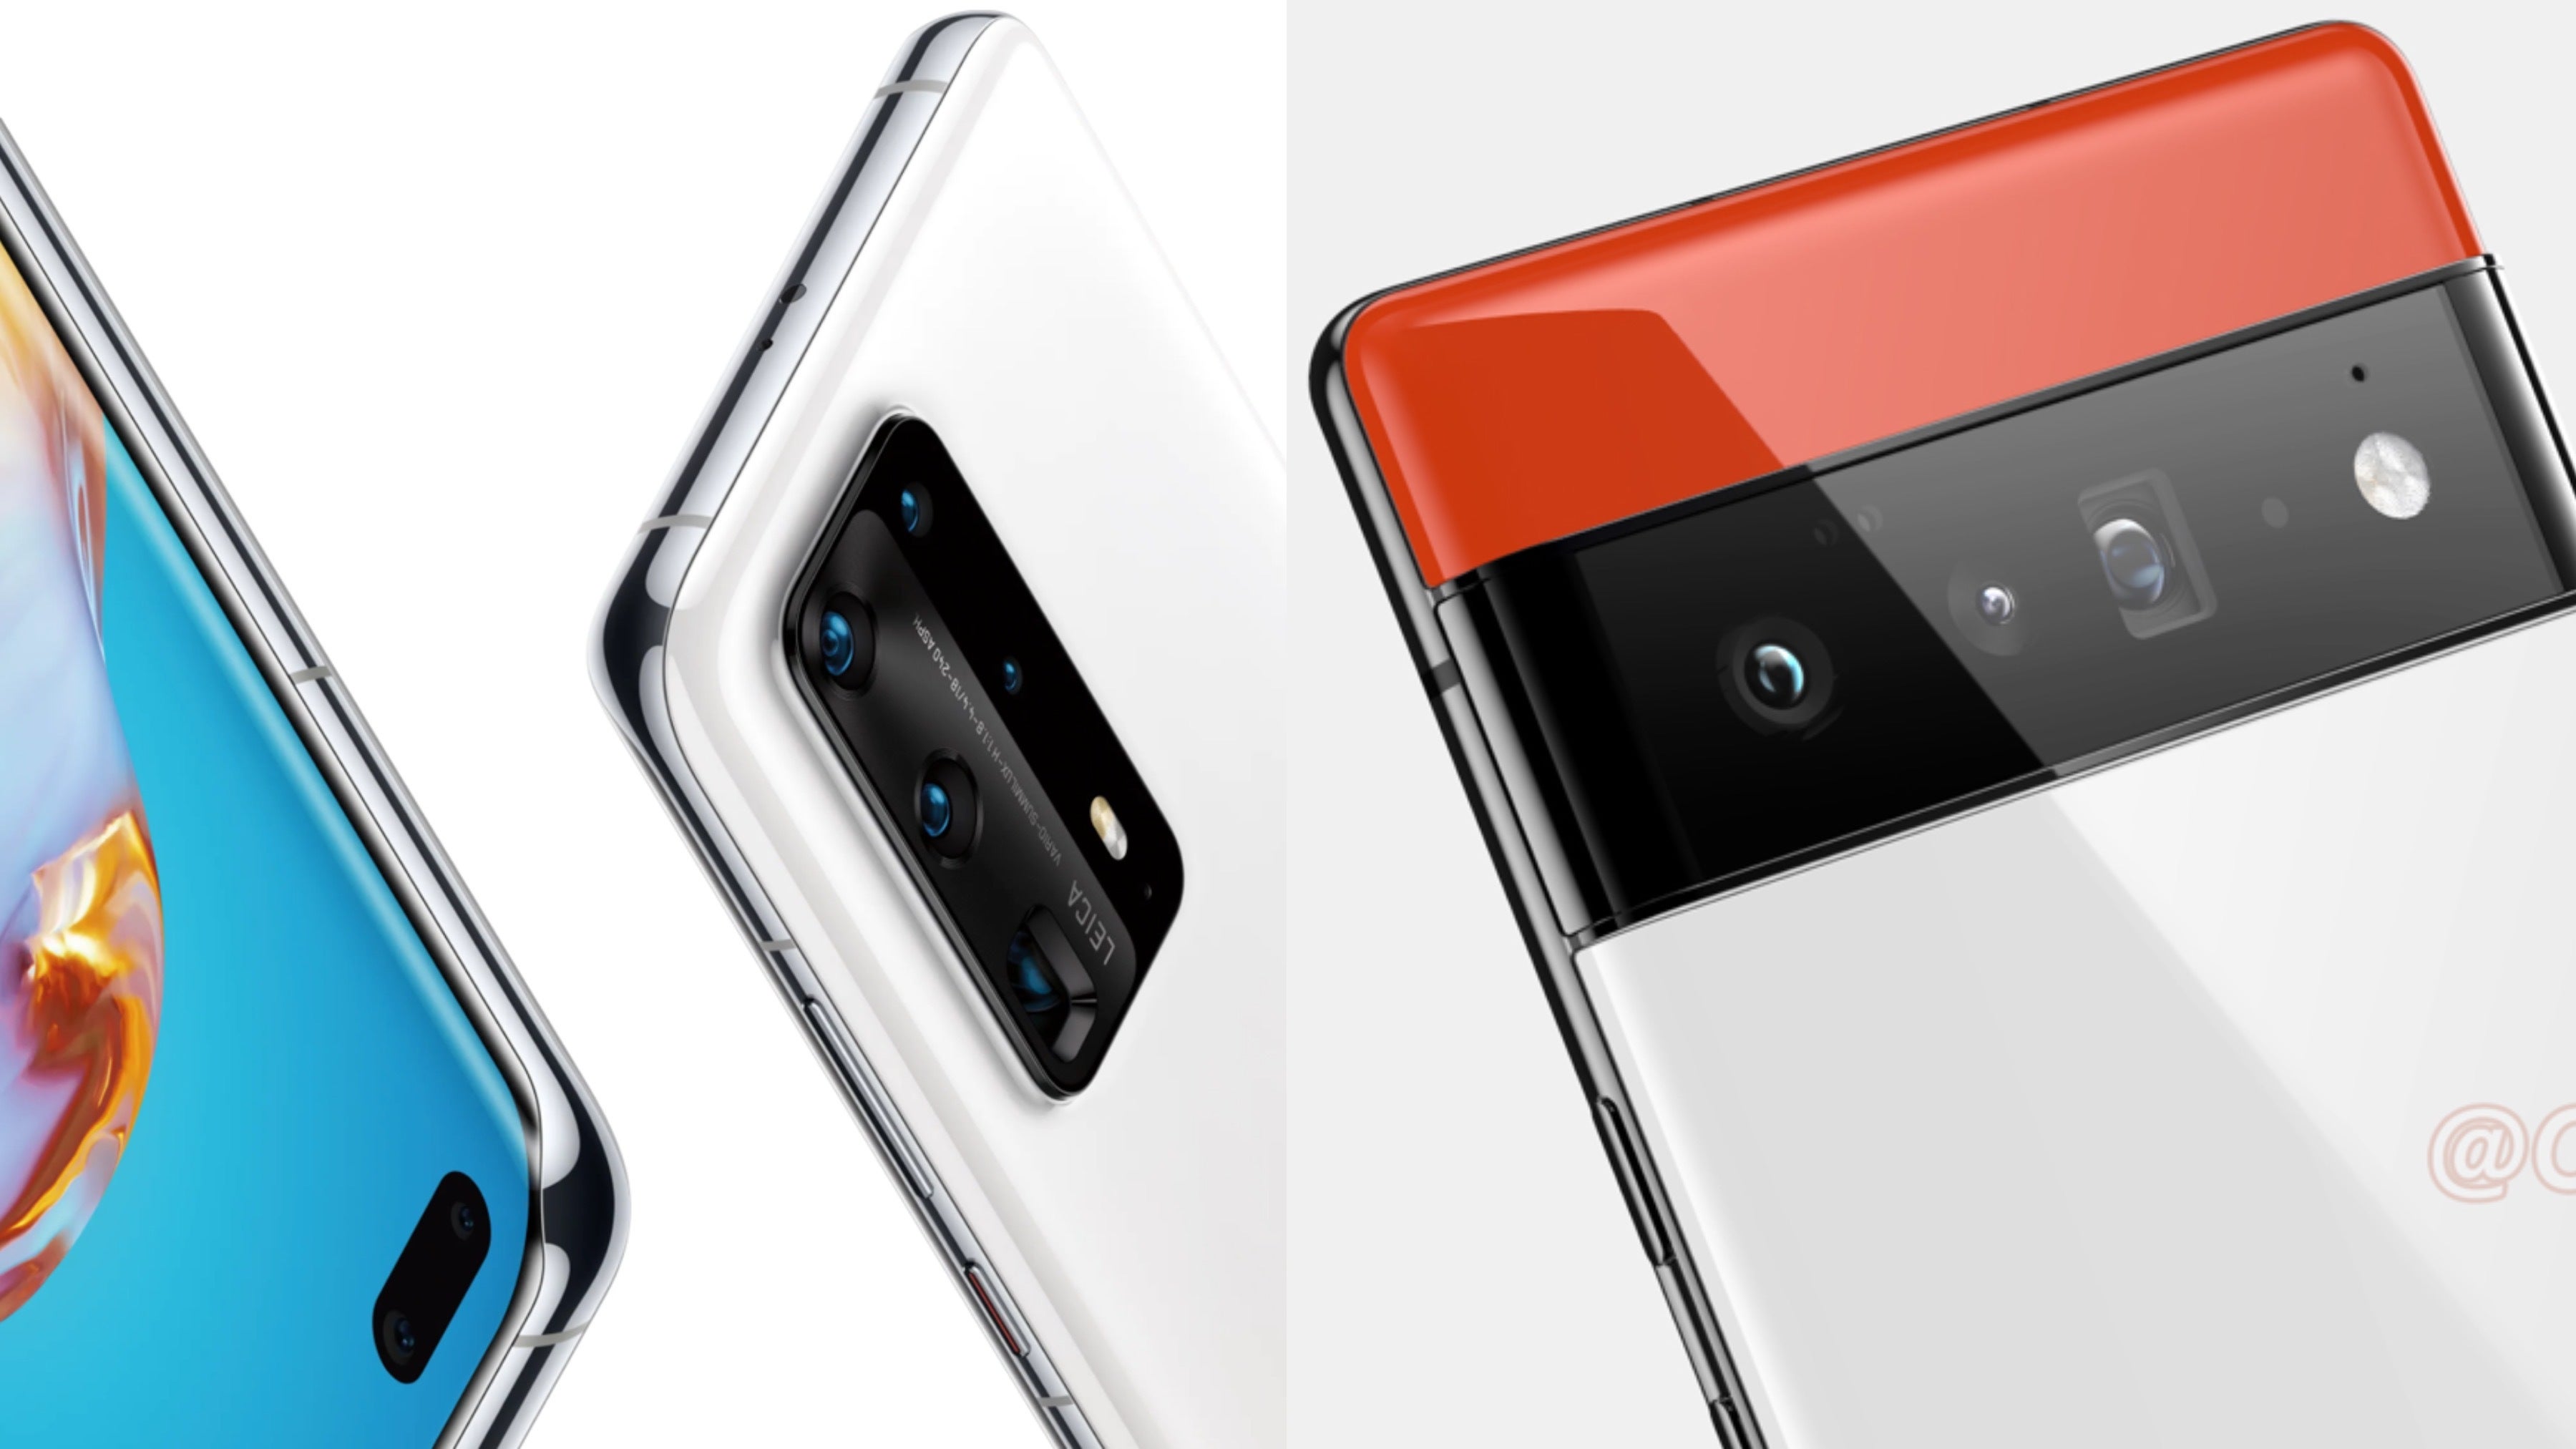 The Huawei P40 Pro+ was the first phone with a 10x optical zoom camera, before Samsung brought it to the Galaxy S21 Ultra. - Google Pixel 6 Pro and its 122MP camera system: The 4-year wait for 4 new cameras